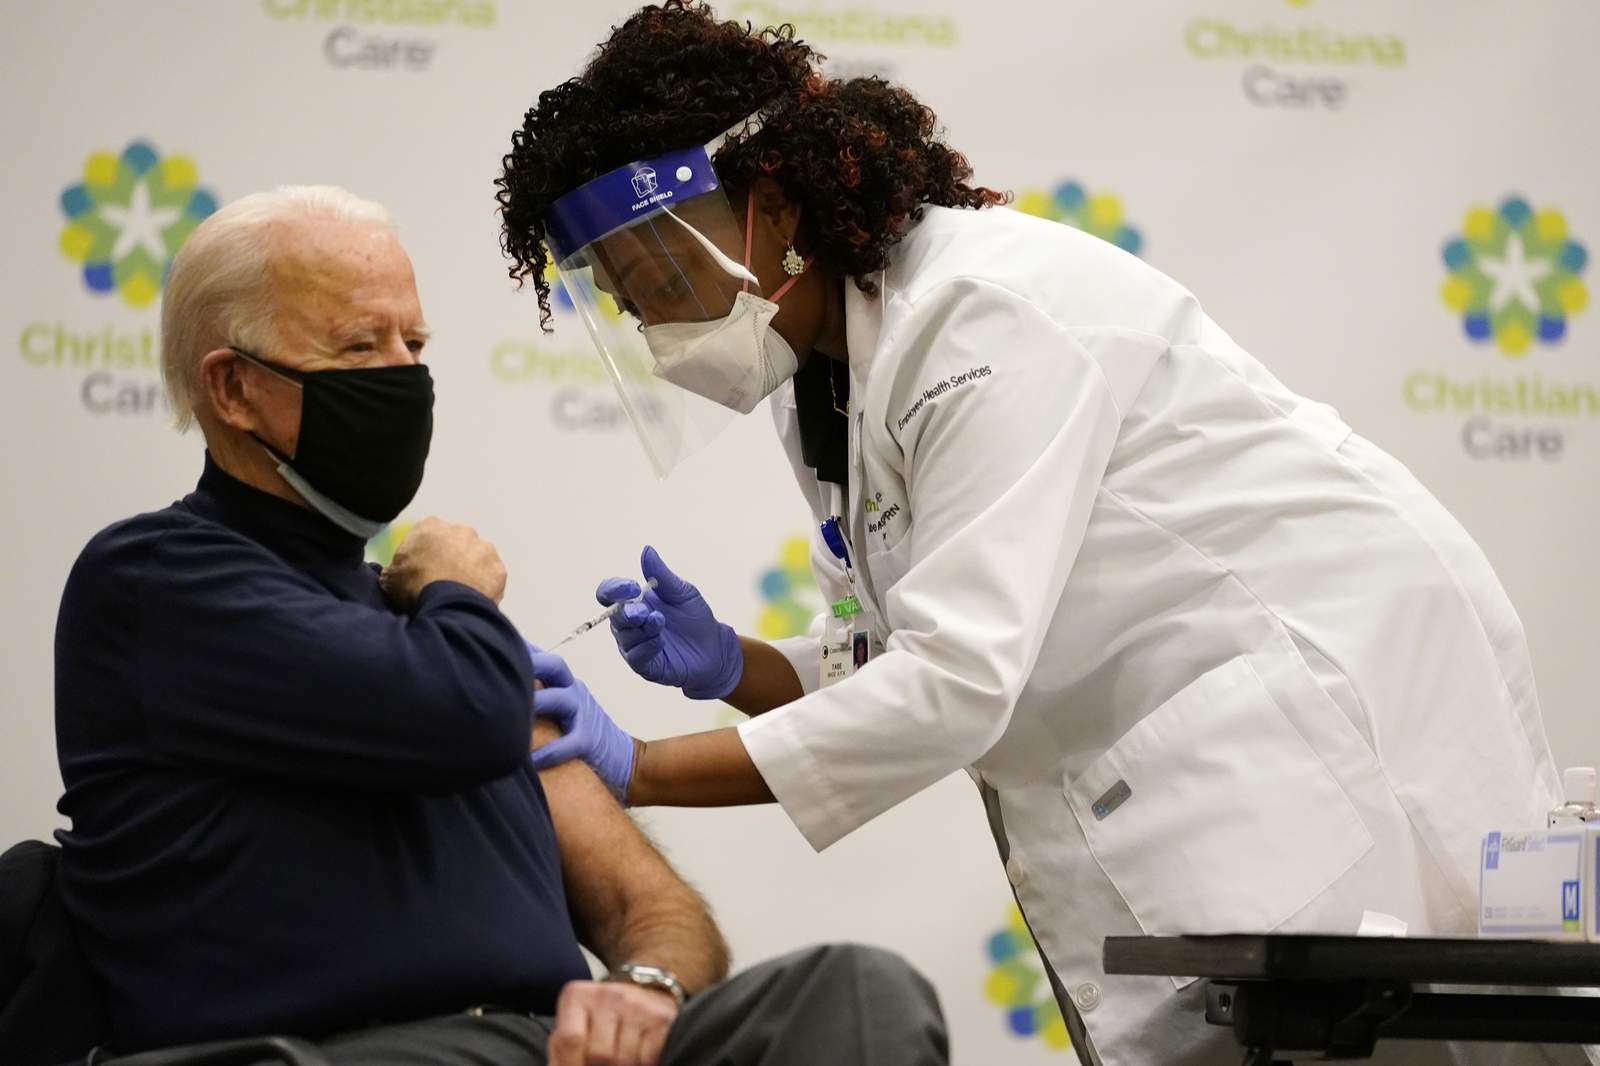 Biden receives COVID vaccine as Trump remains on sidelines